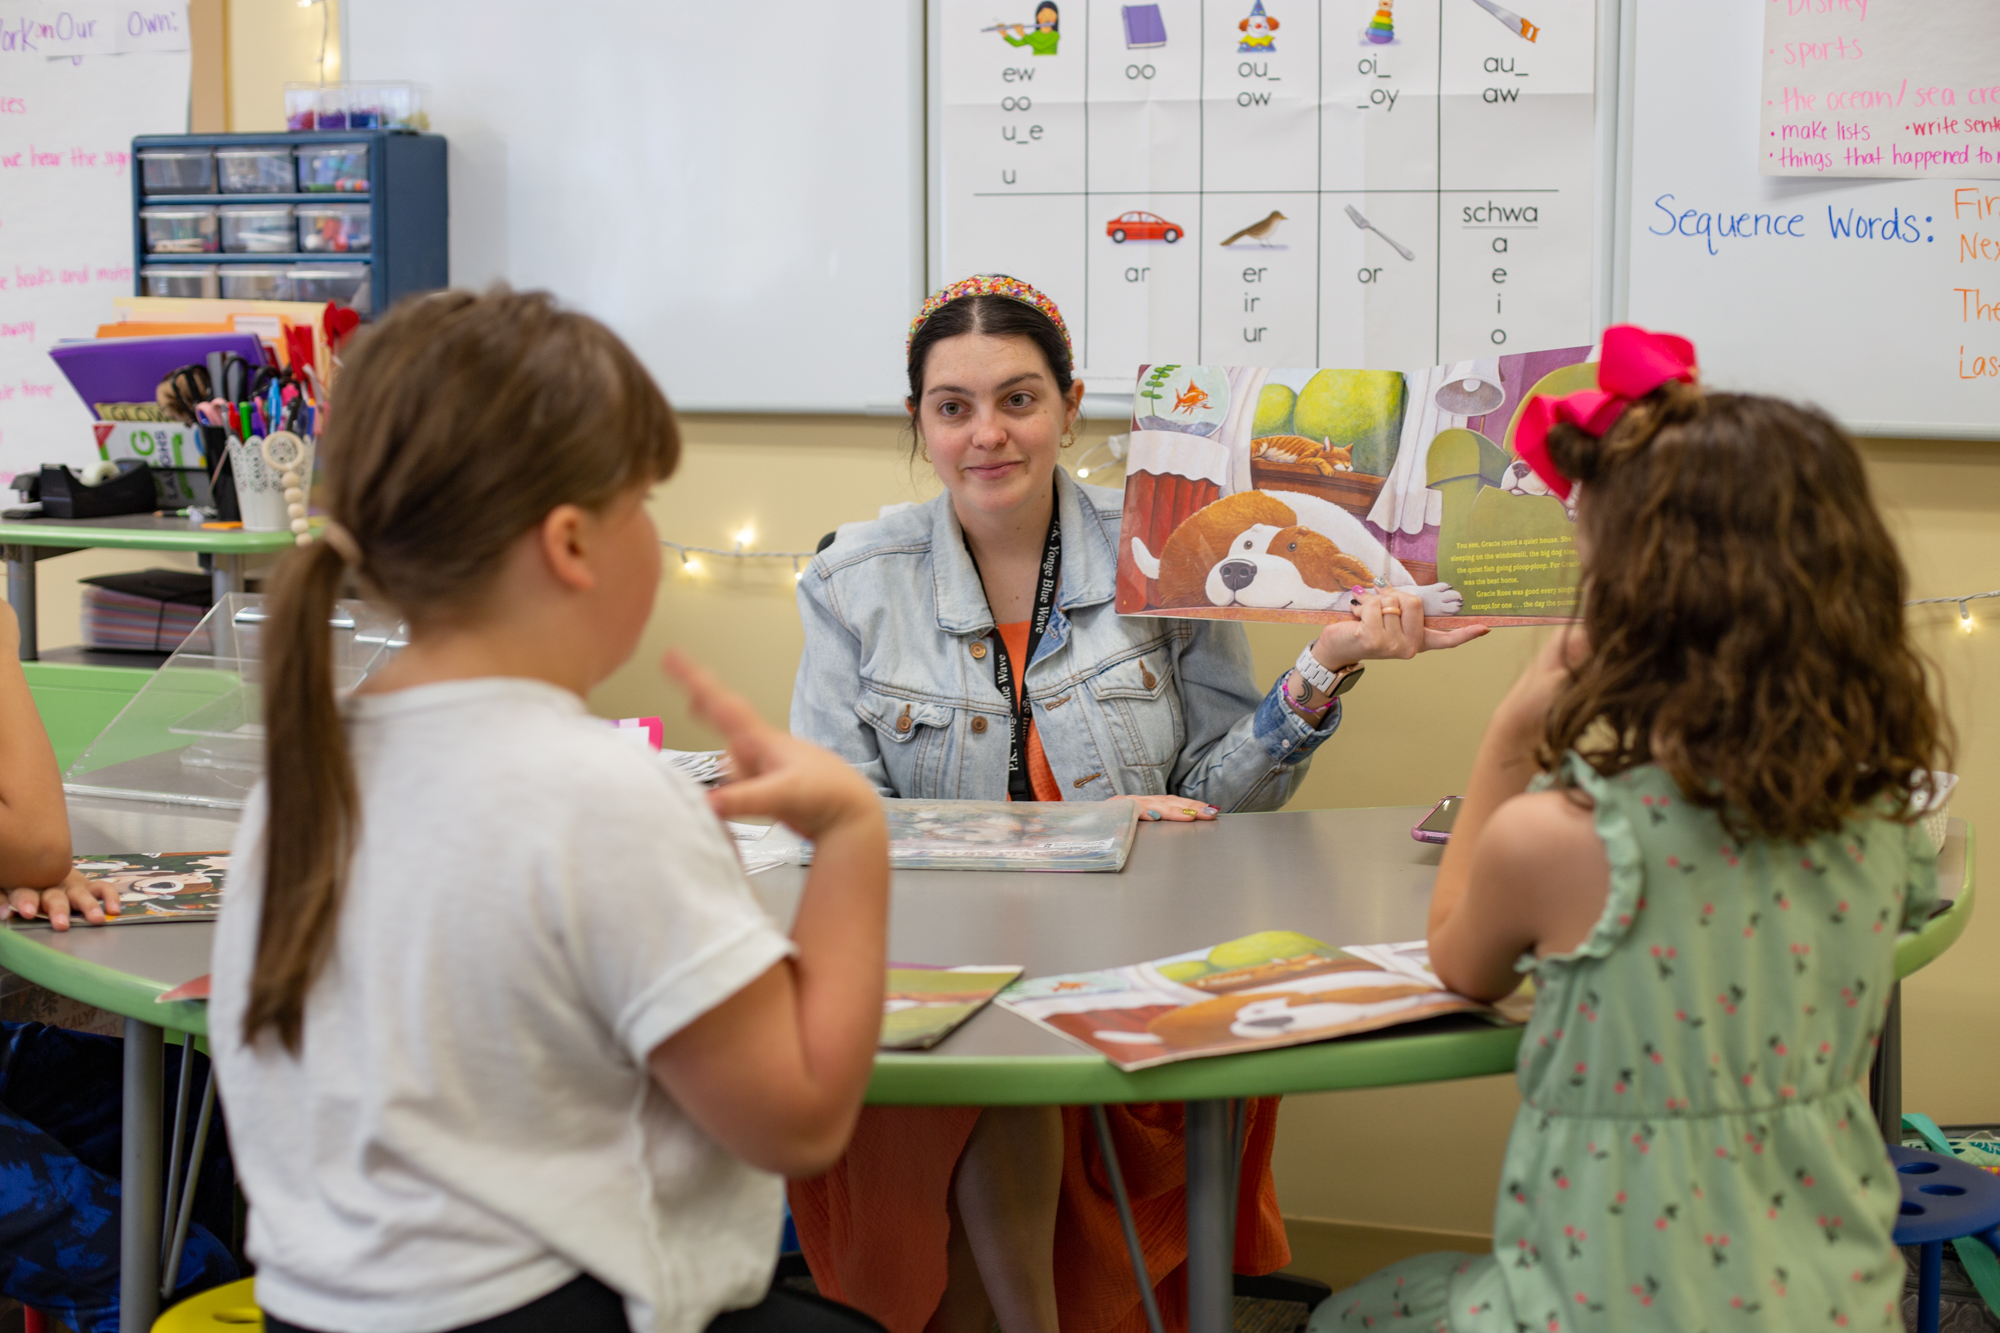 A teacher reading a picture book to two young students at a table.